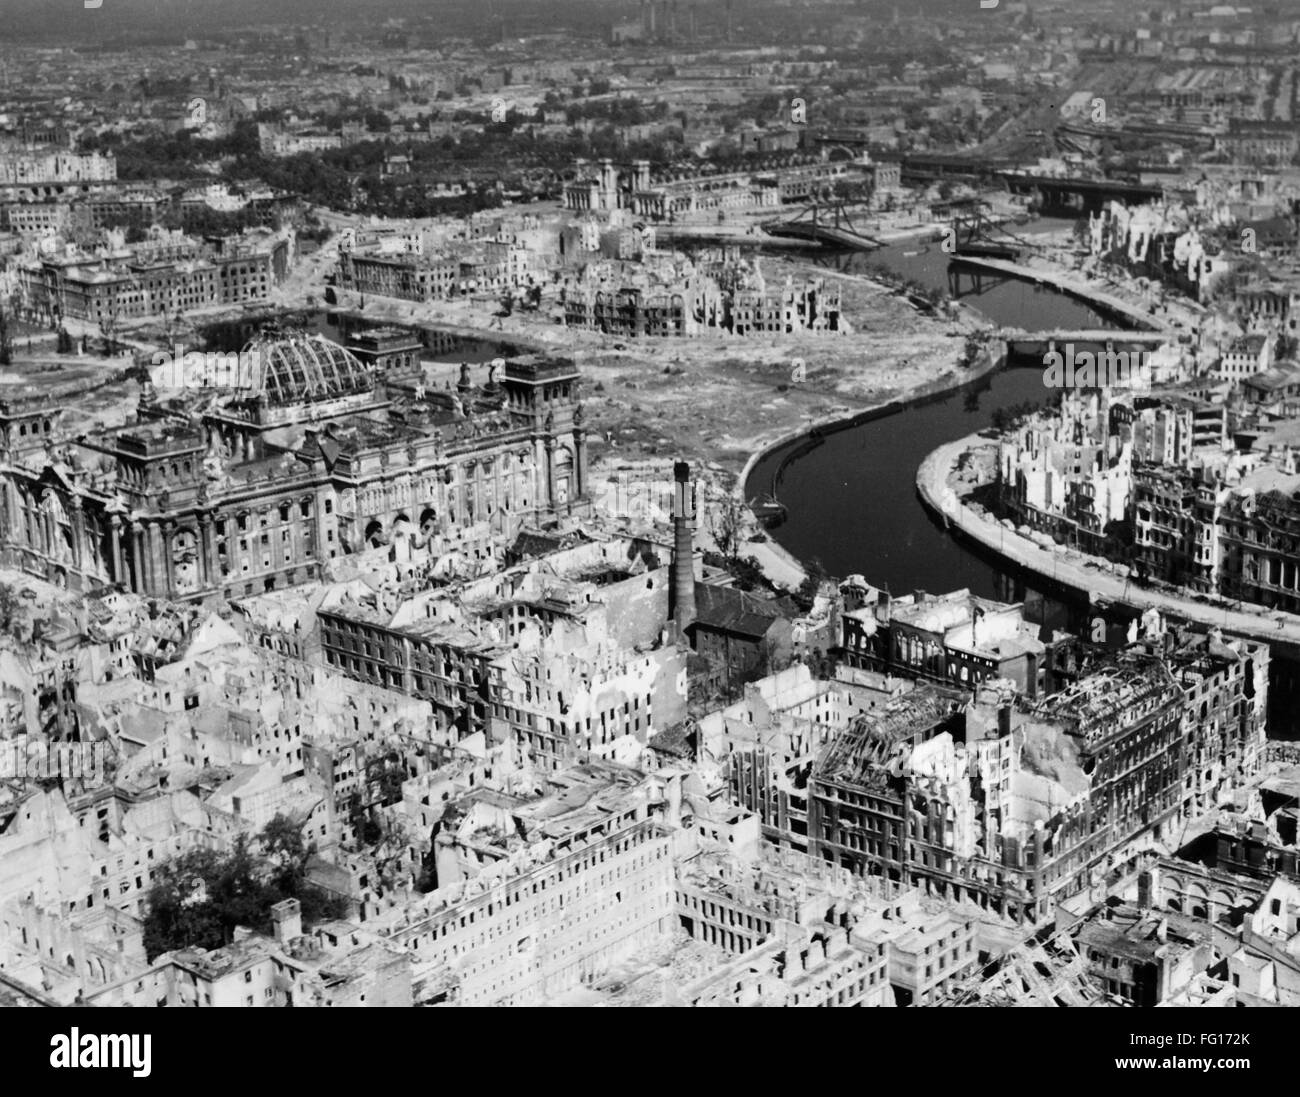 WORLD WAR II: BERLIN, 1945. /nBerlin in ruins after Allied air strikes at the end of World War II. At left center is the Reichstag. Photograph, 1945. Stock Photo